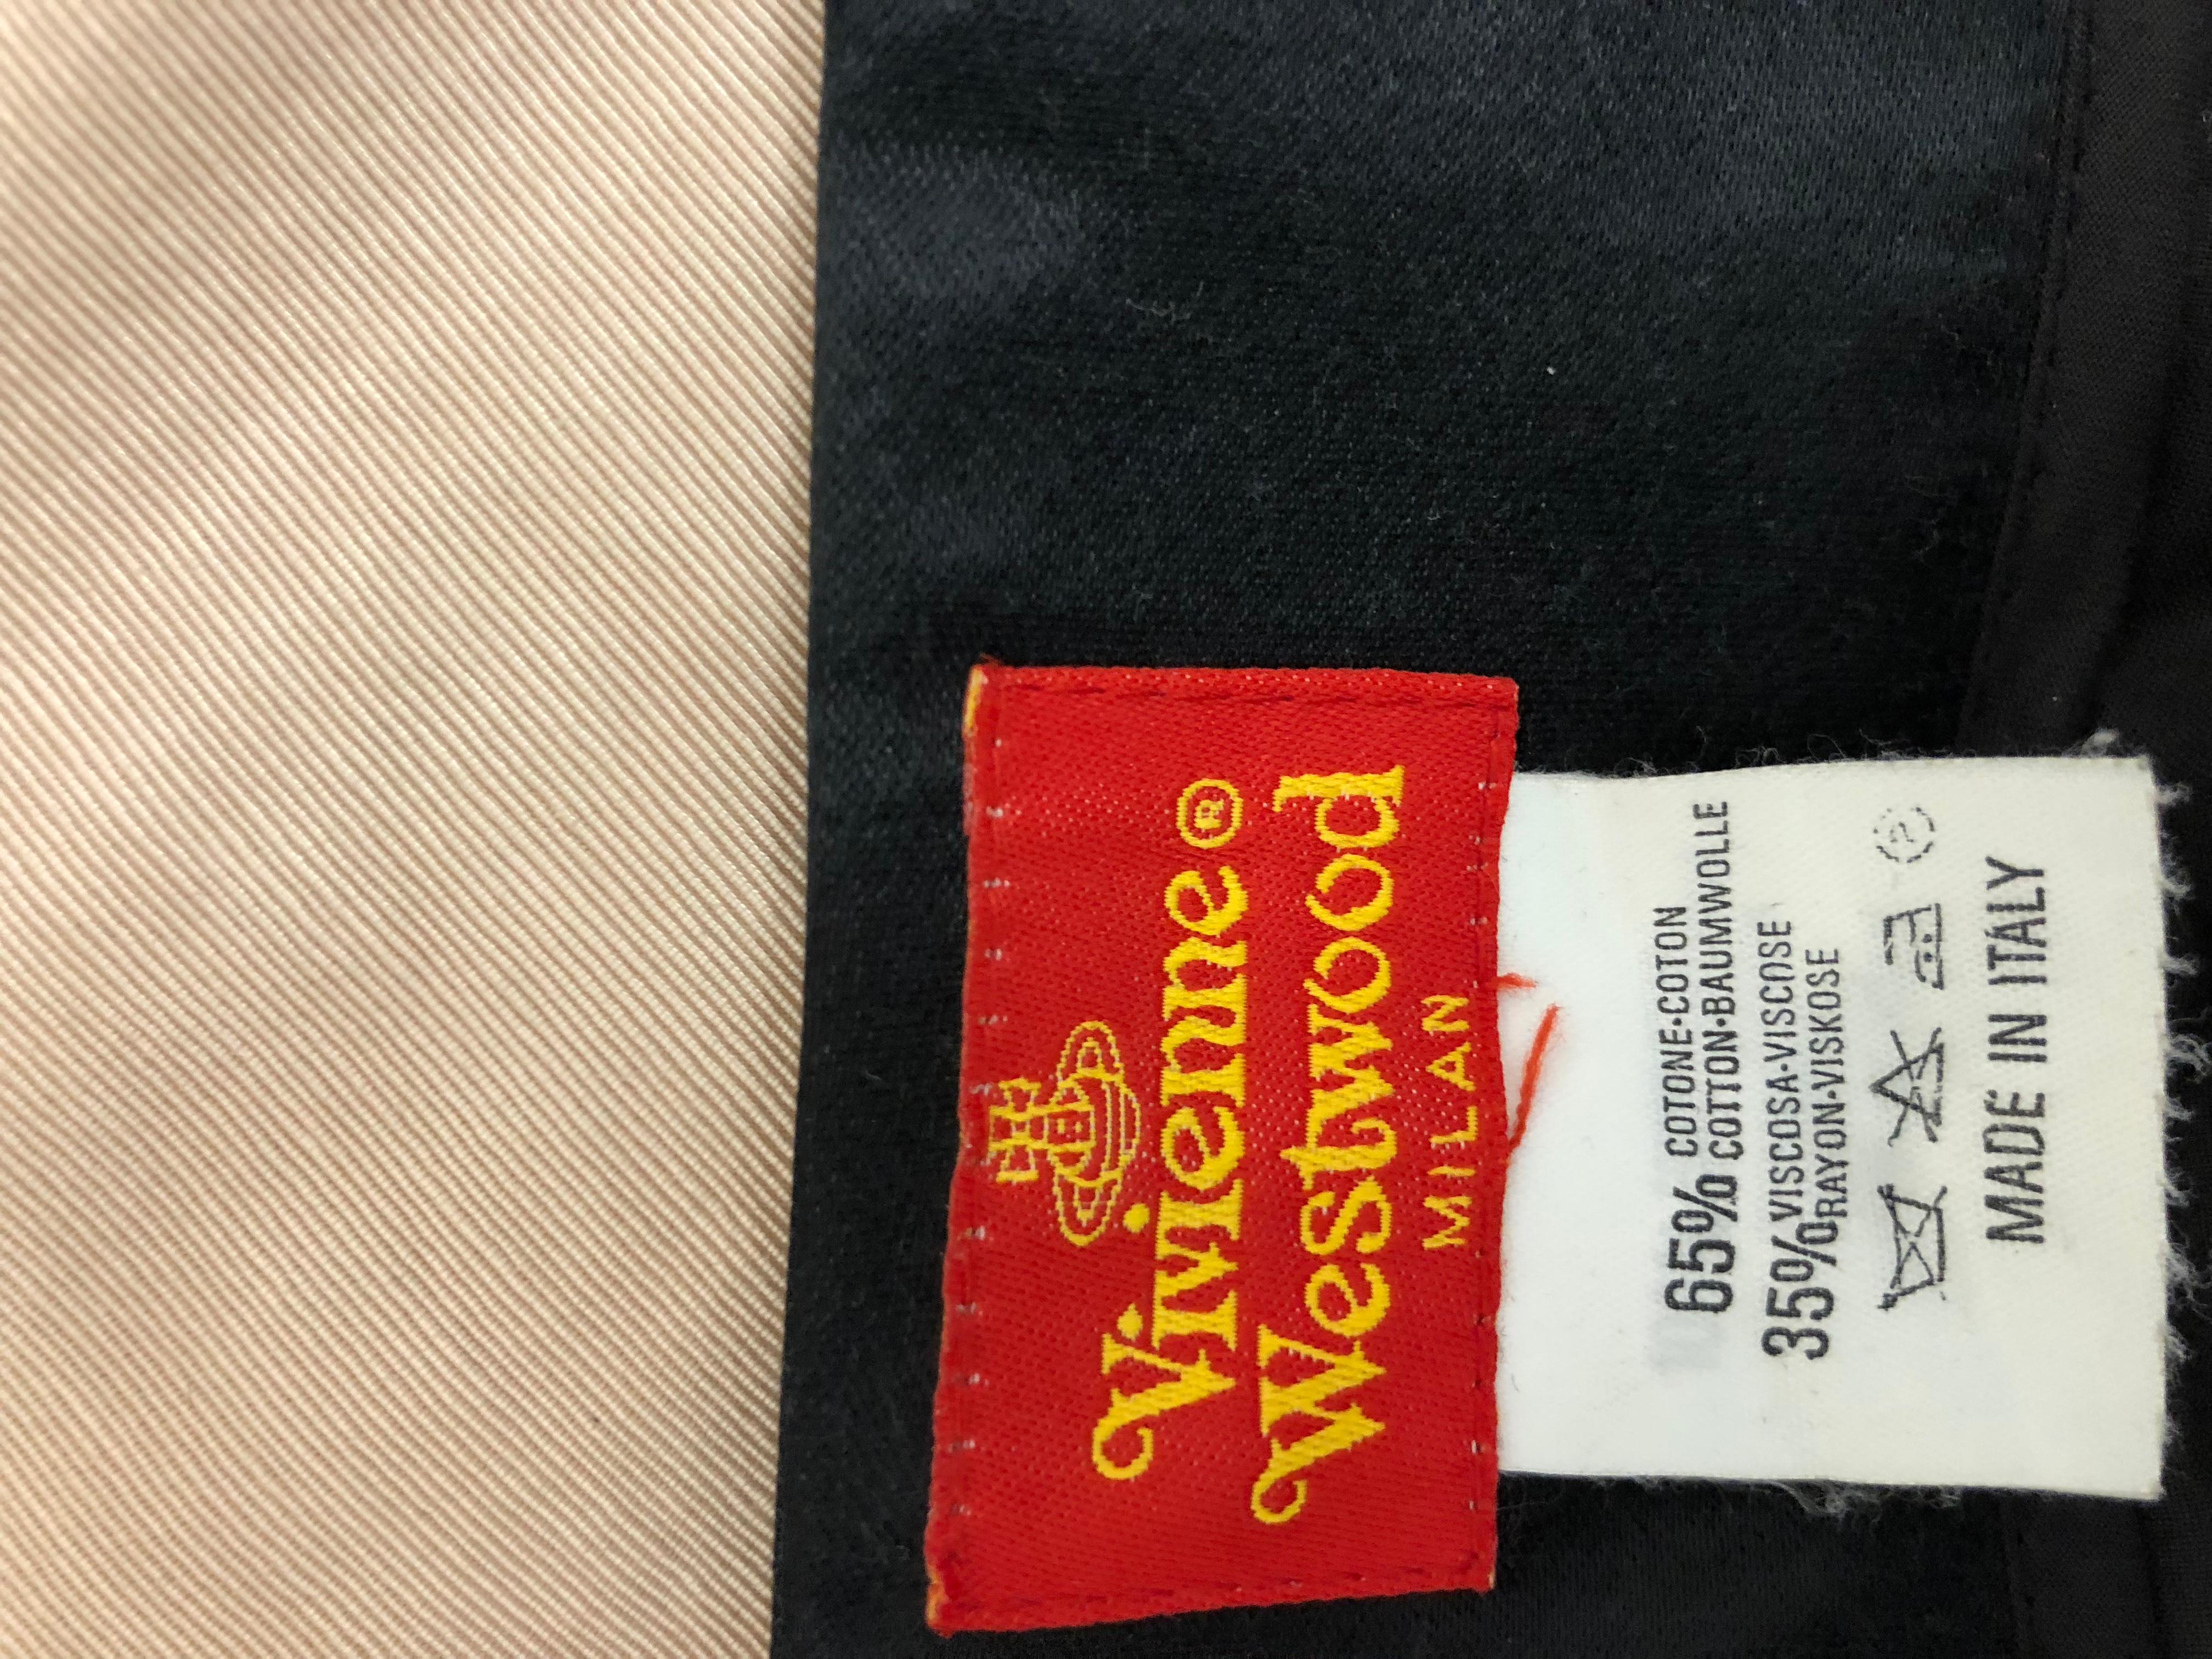 Black Vivienne Westwood Milan Red Label Skirt with Max Mara Cotton Top, 1990s  For Sale